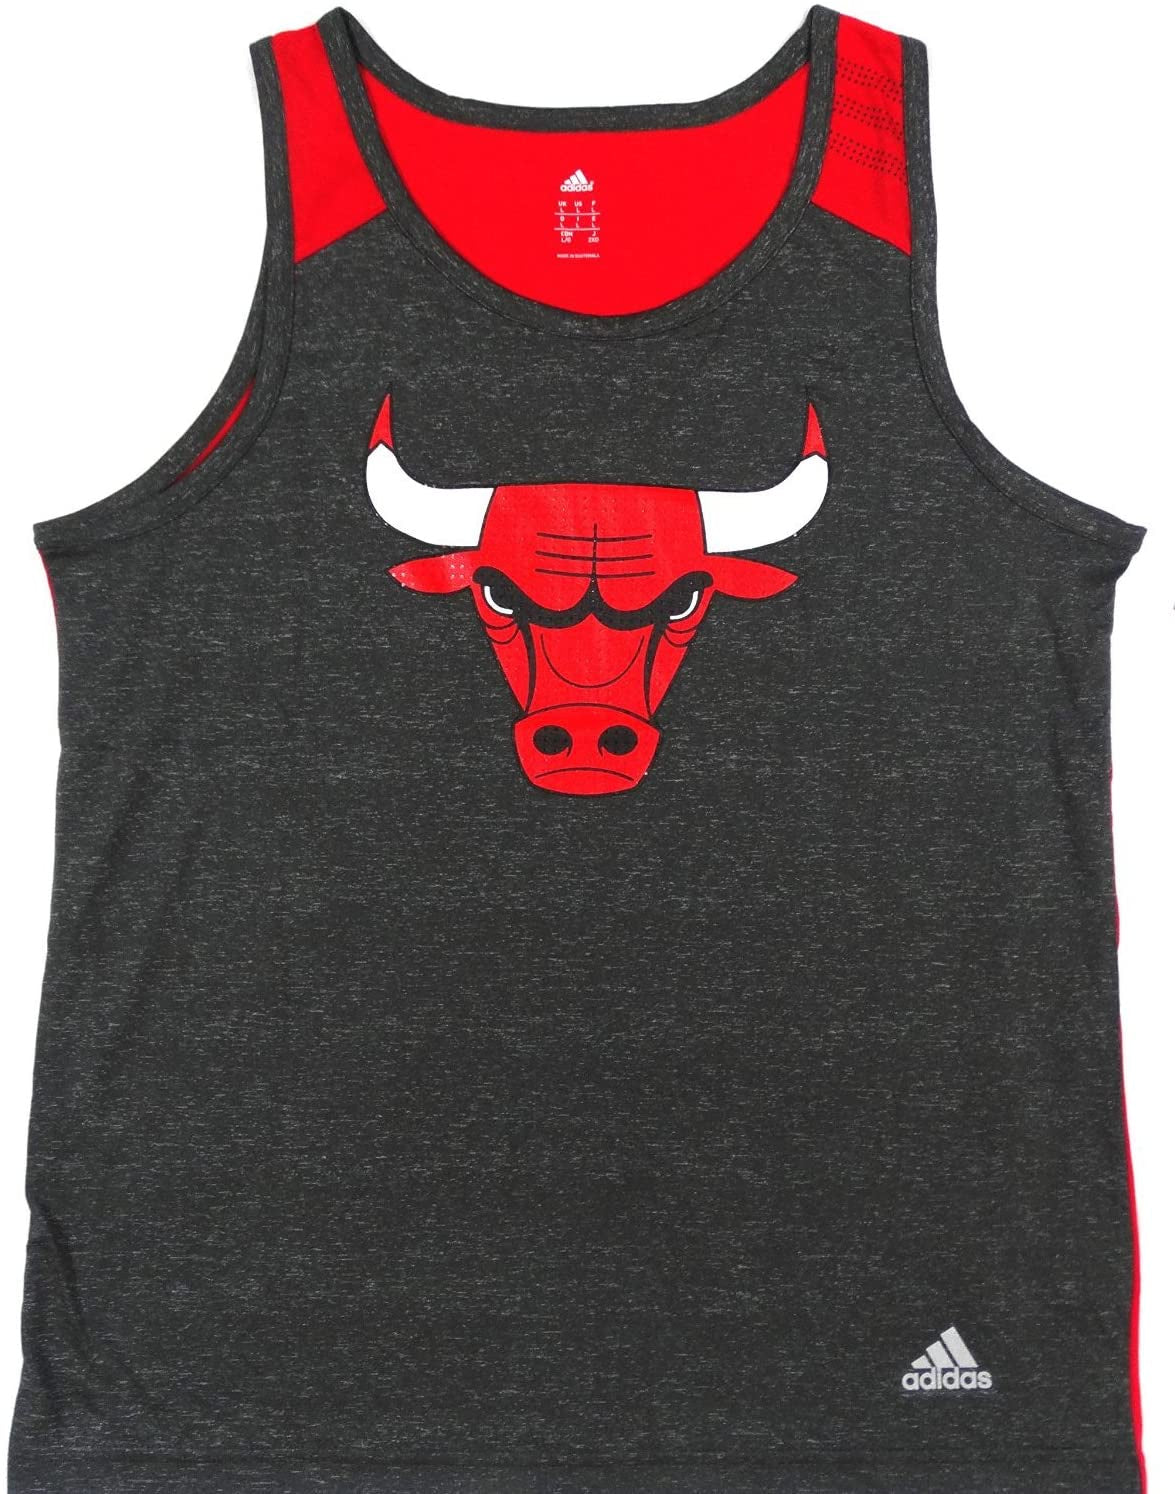 Chicago Bulls Grey Mens Climalite Lightweight FAS Tank Top by Adidas